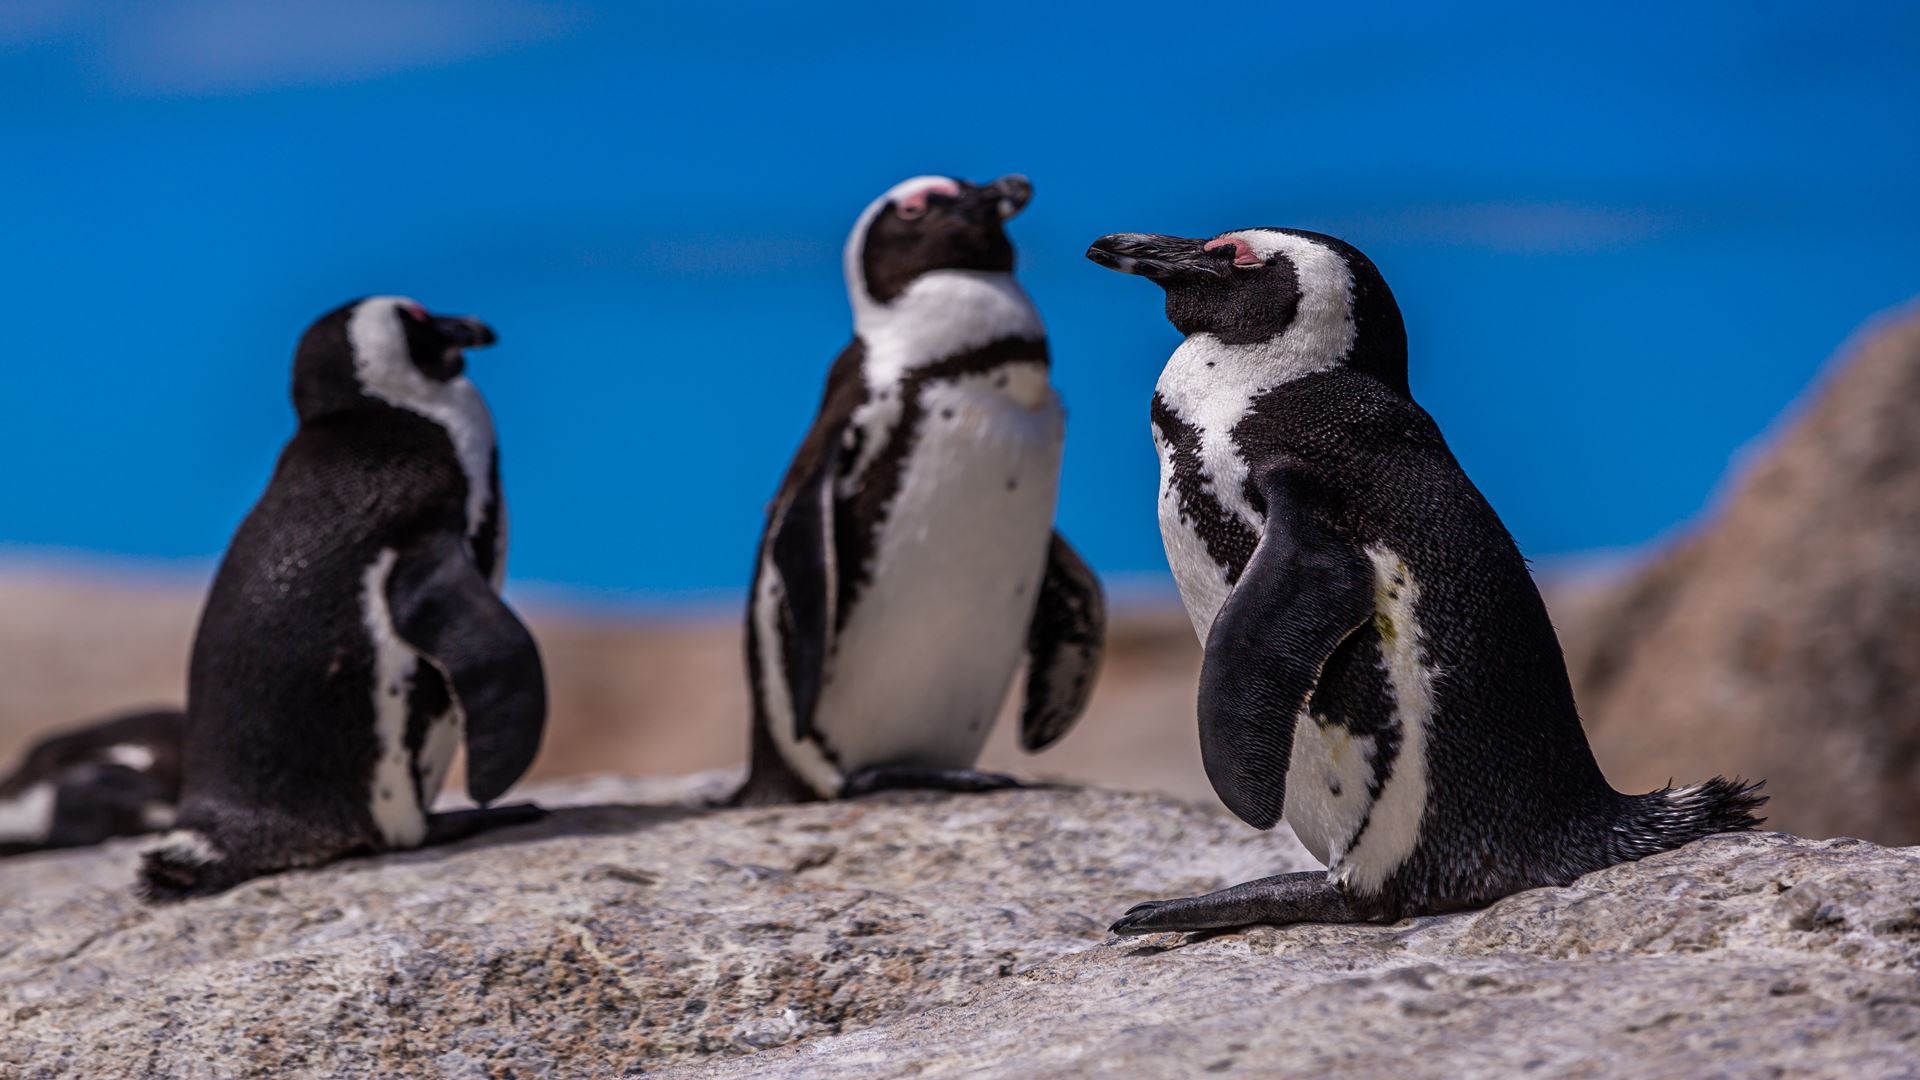 How to see penguins in Ushuaia